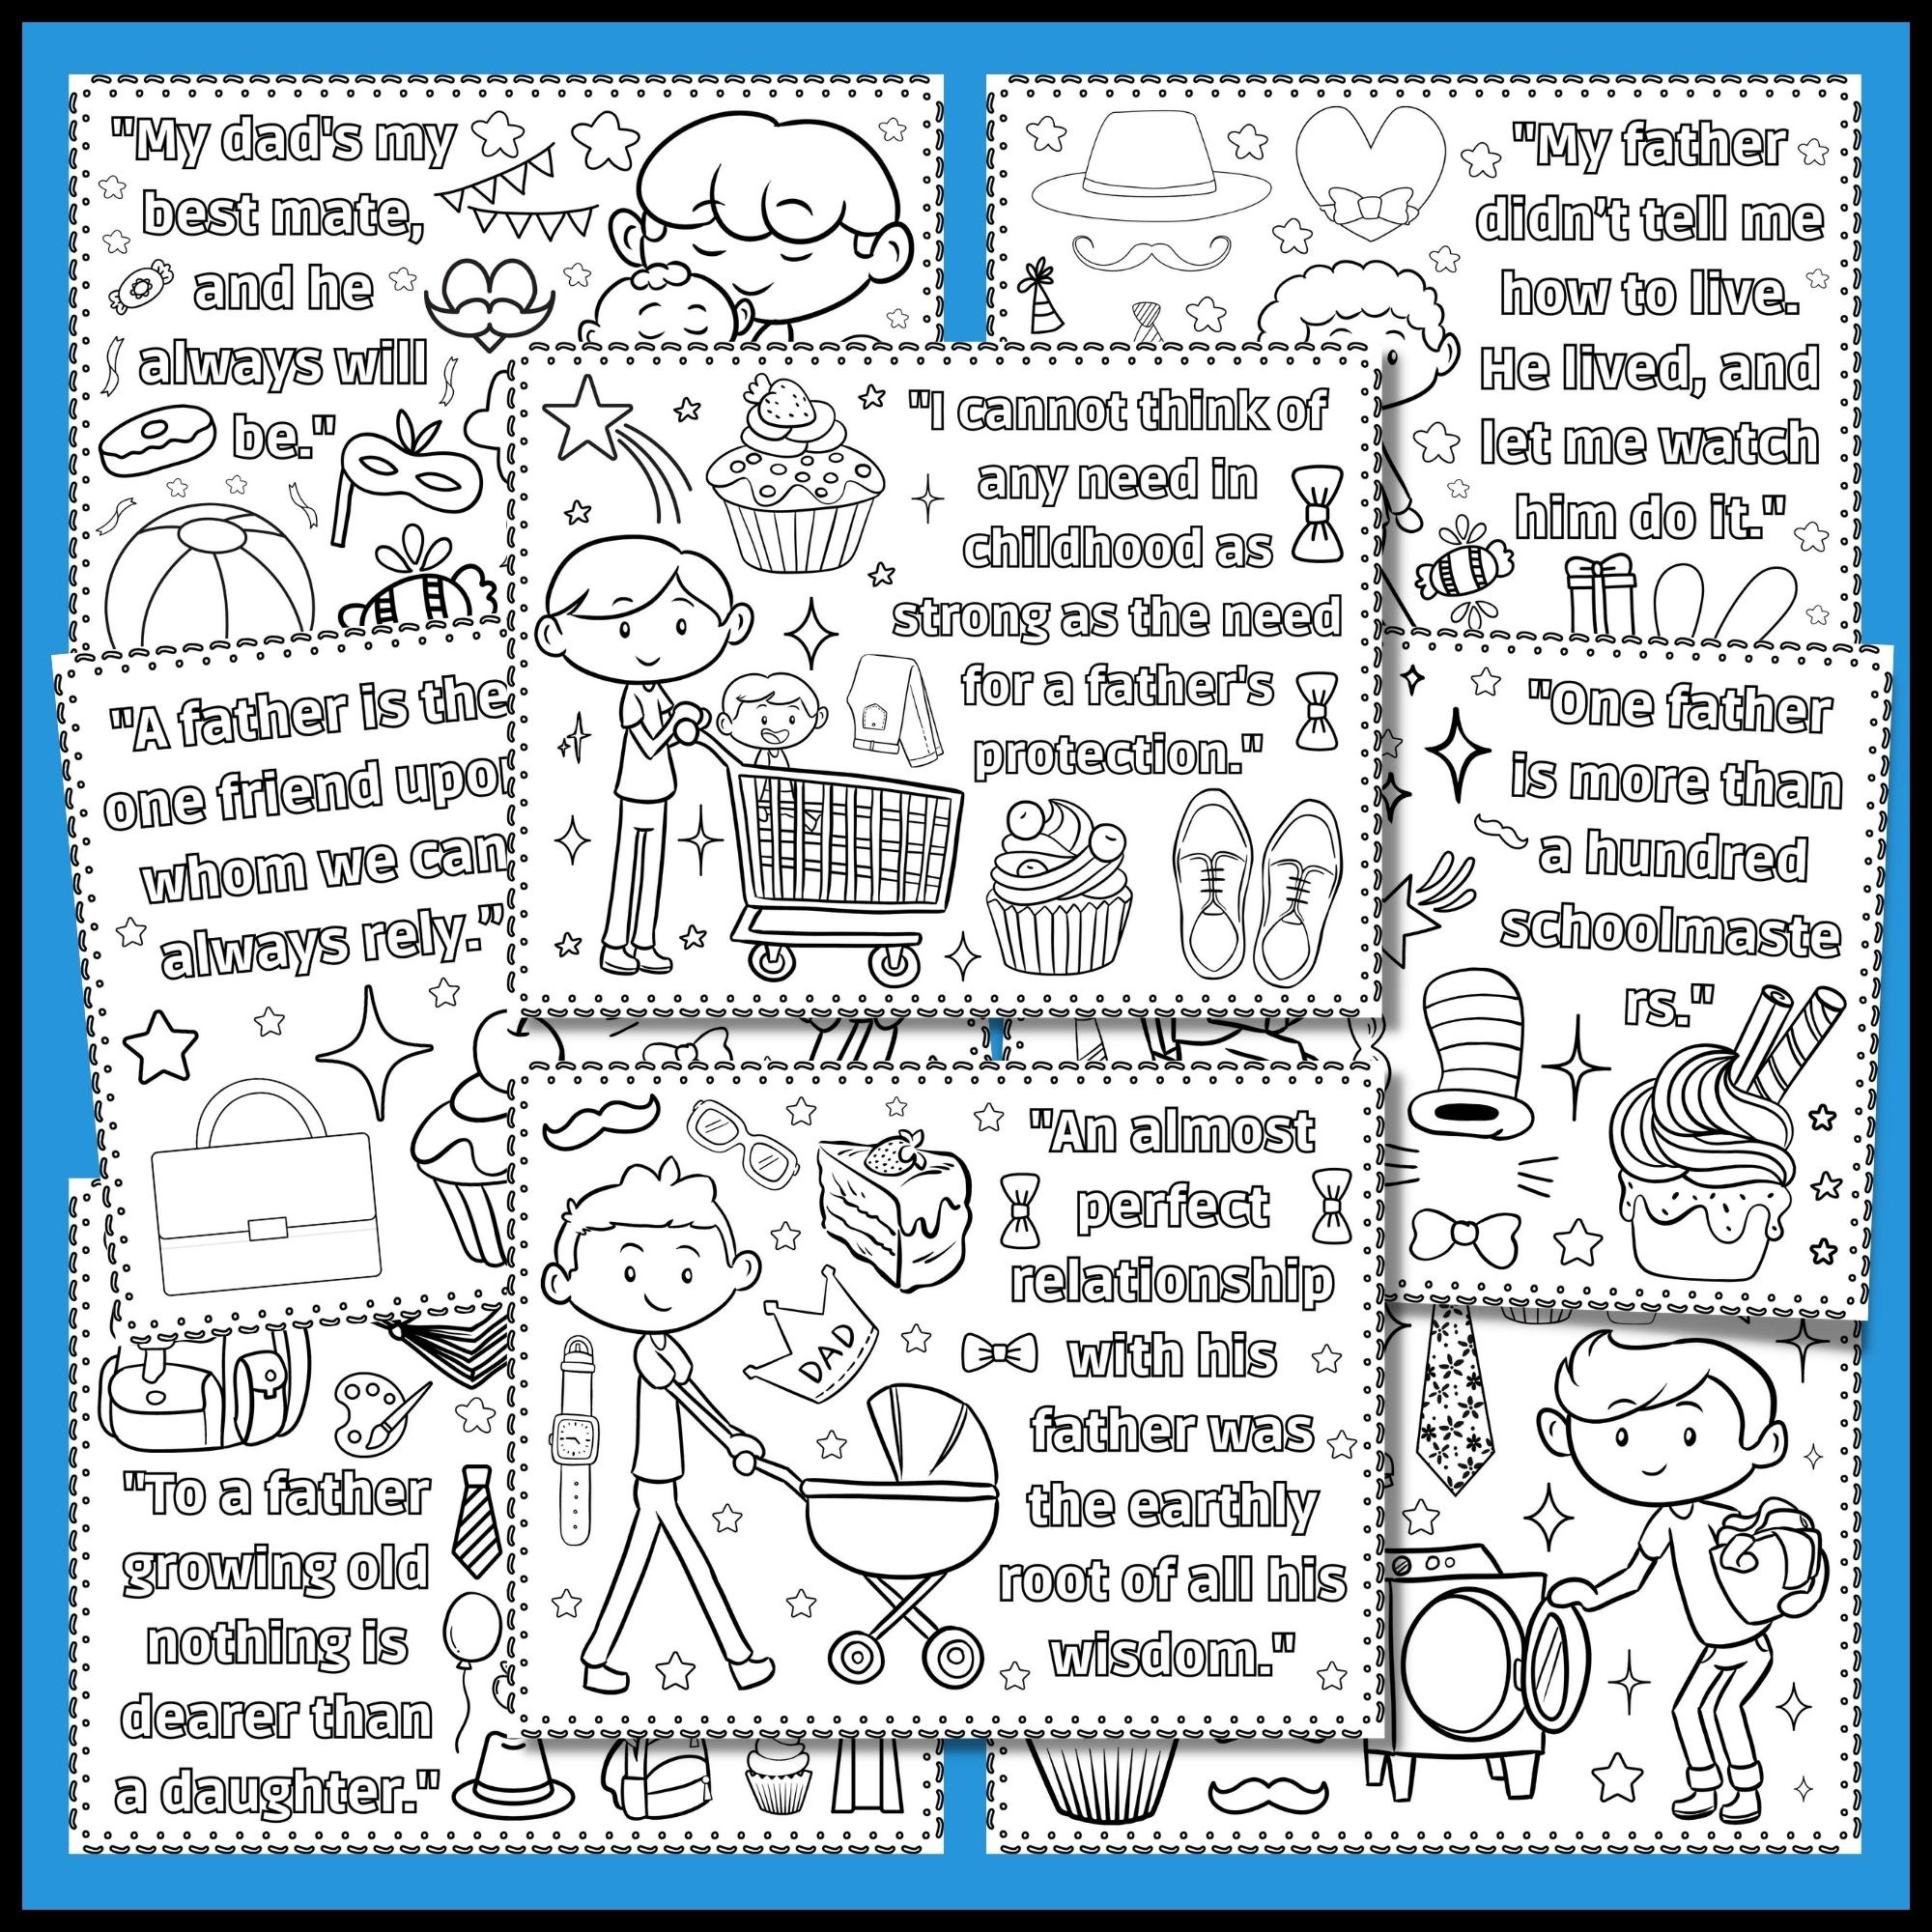 Fathers day coloring pages â inspiring quotes and vibrant designs for heartfelt celebrations made by teachers